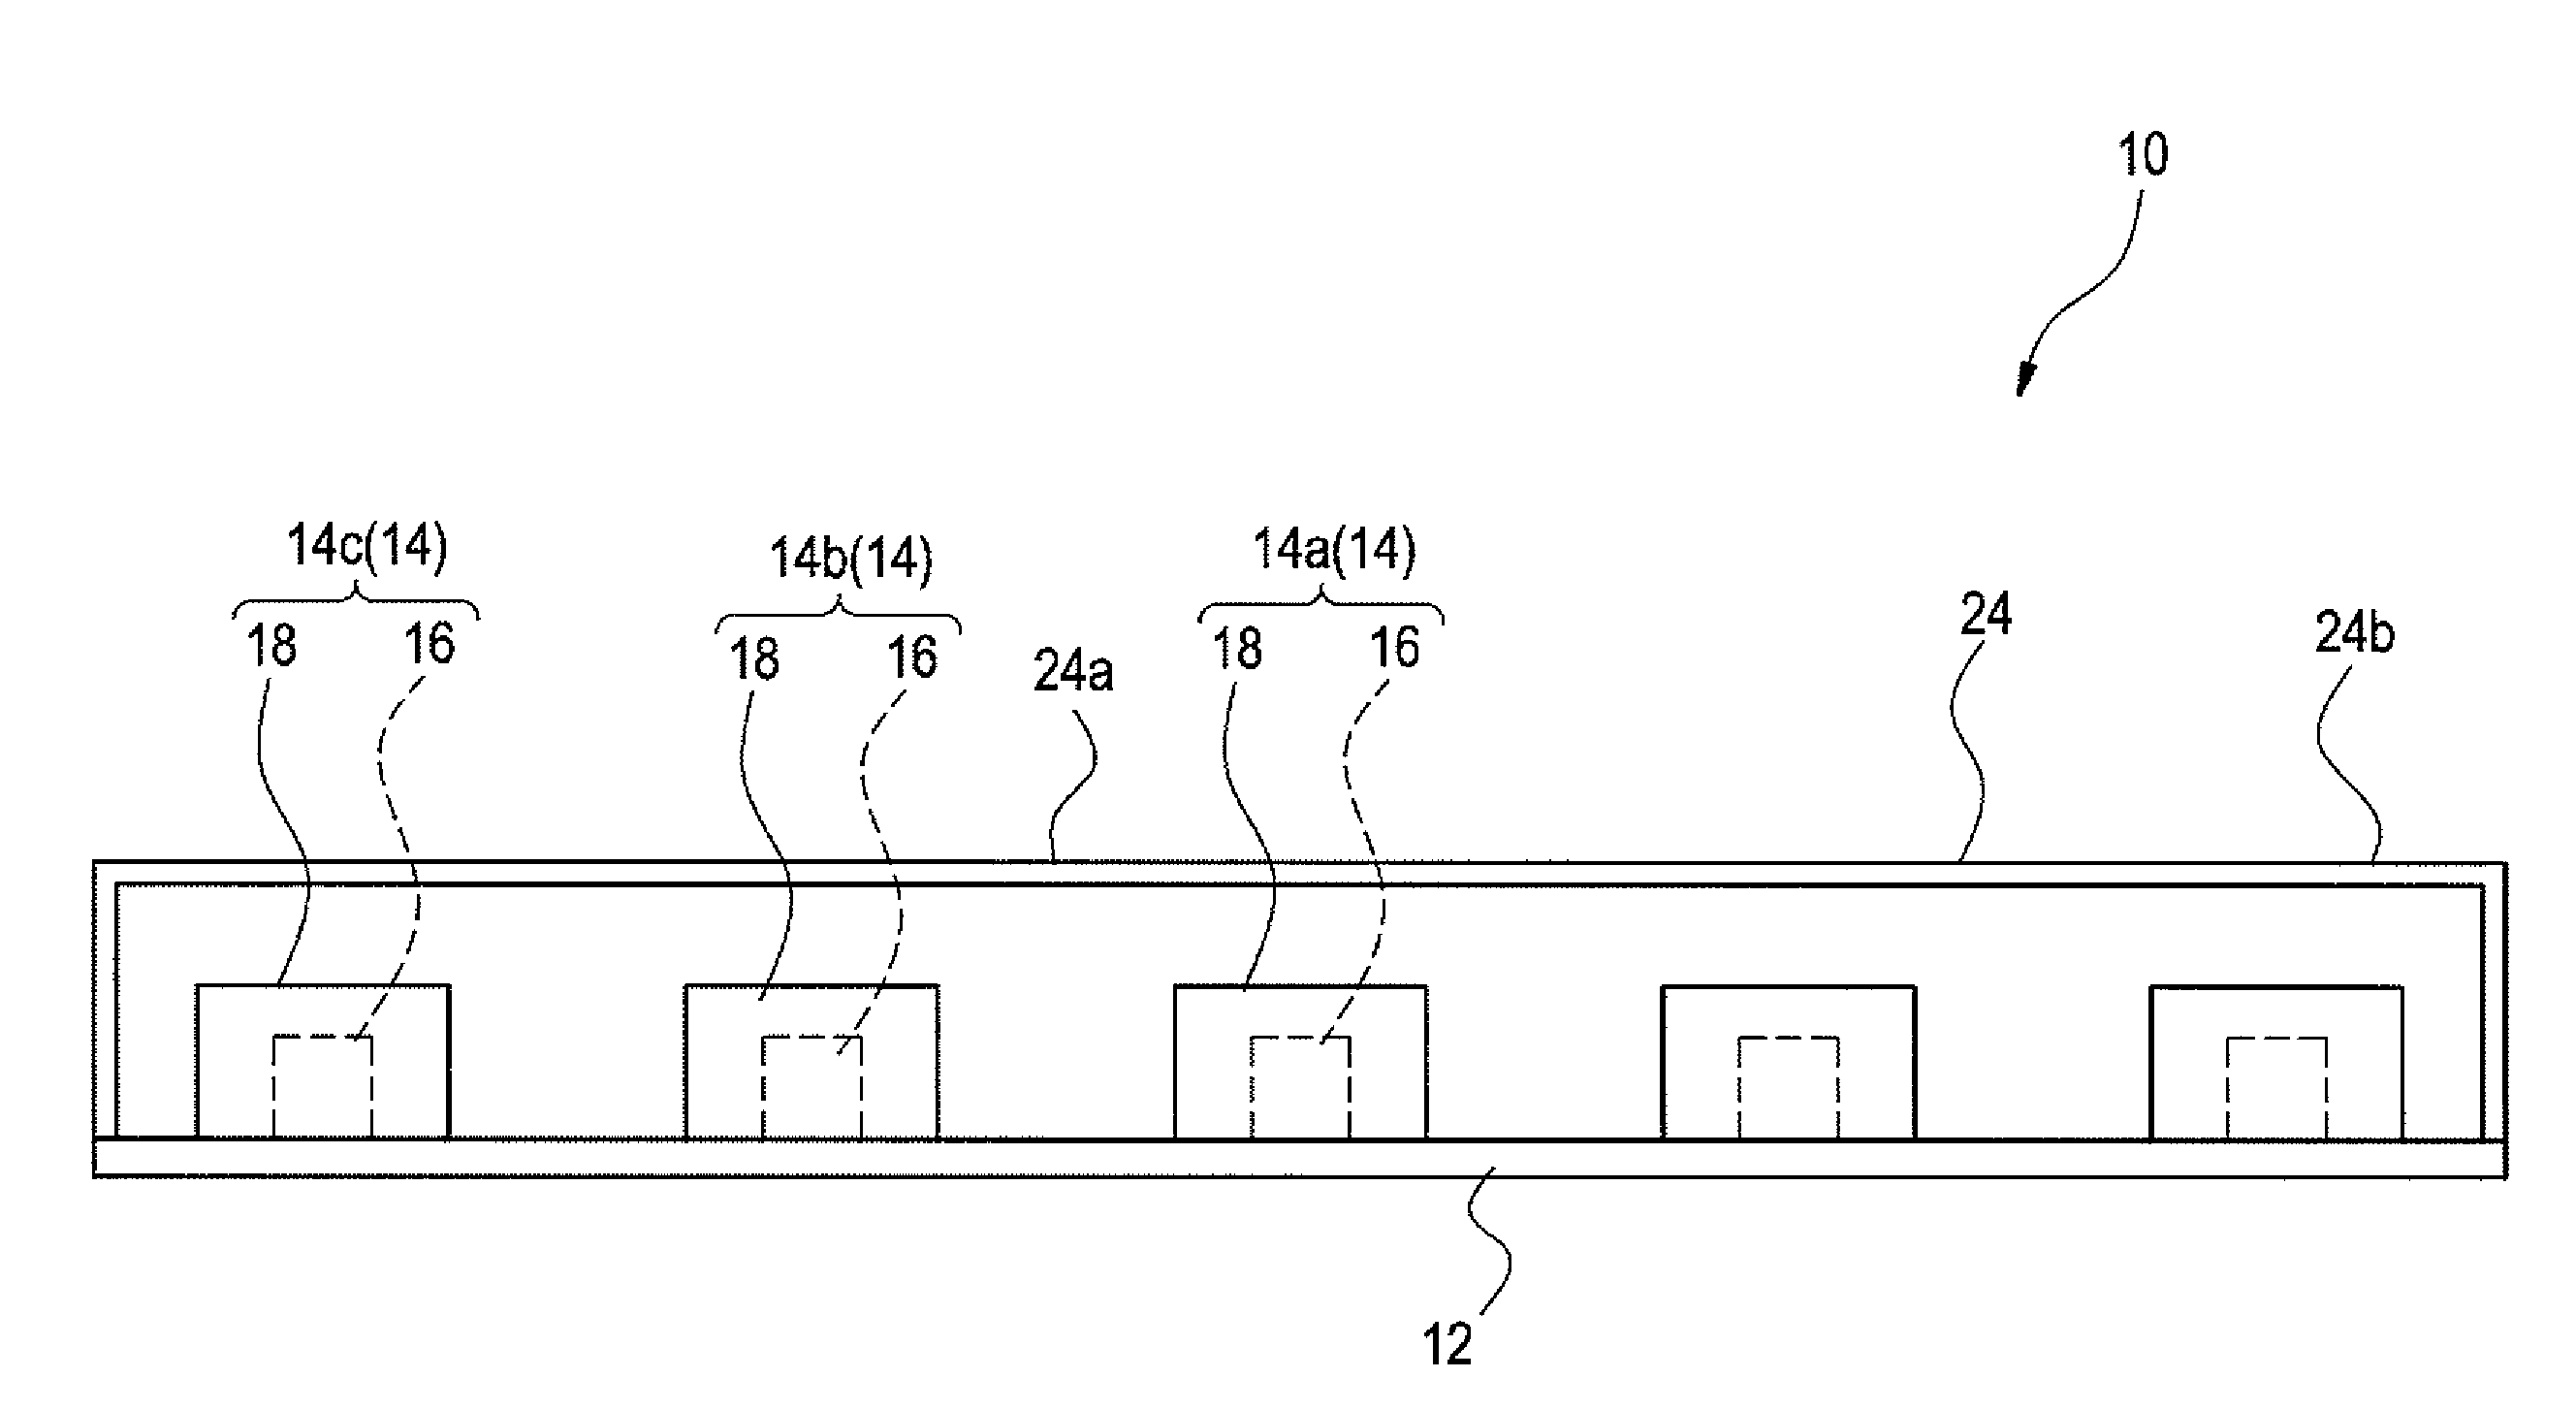 Illumination device having multiple LED elements with varying color temperatures